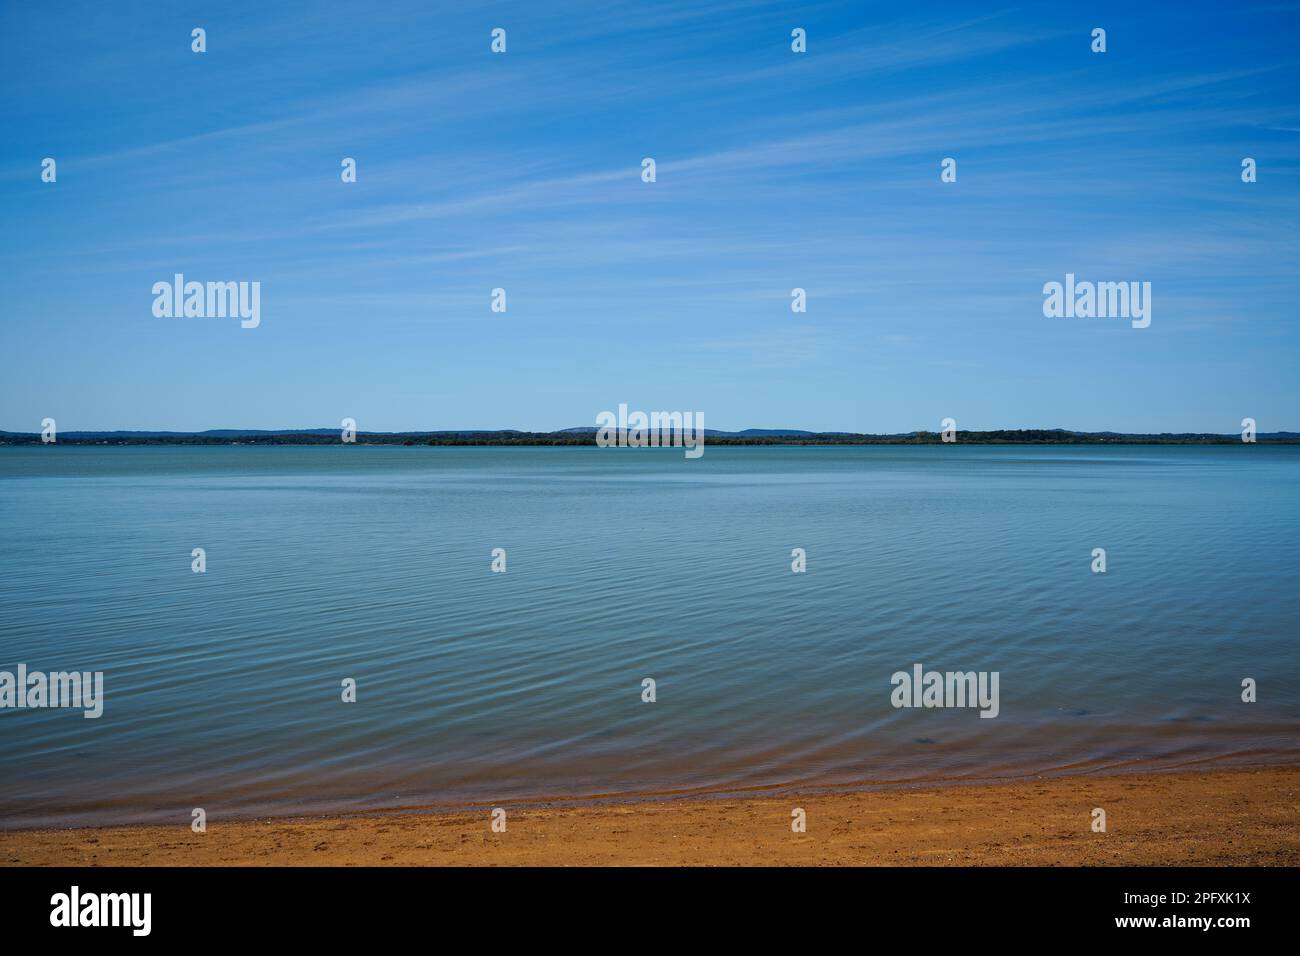 View from Redland Bay across smooth, calm water, to southern Moreton Bay islands on the horizon, under a beautiful blue sky with cirrostratus clouds Stock Photo